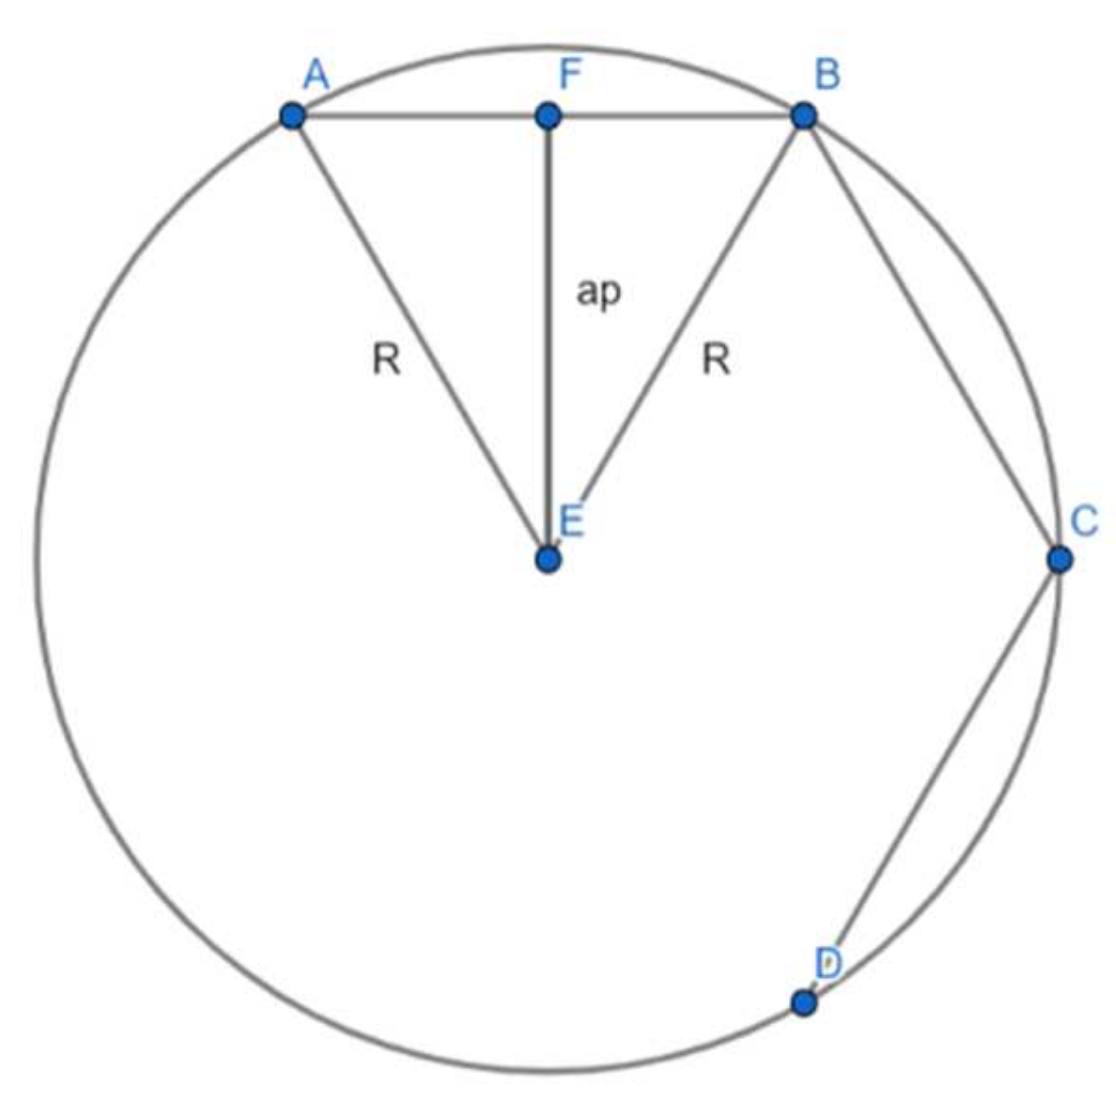 regular decagon inscribed in a circle